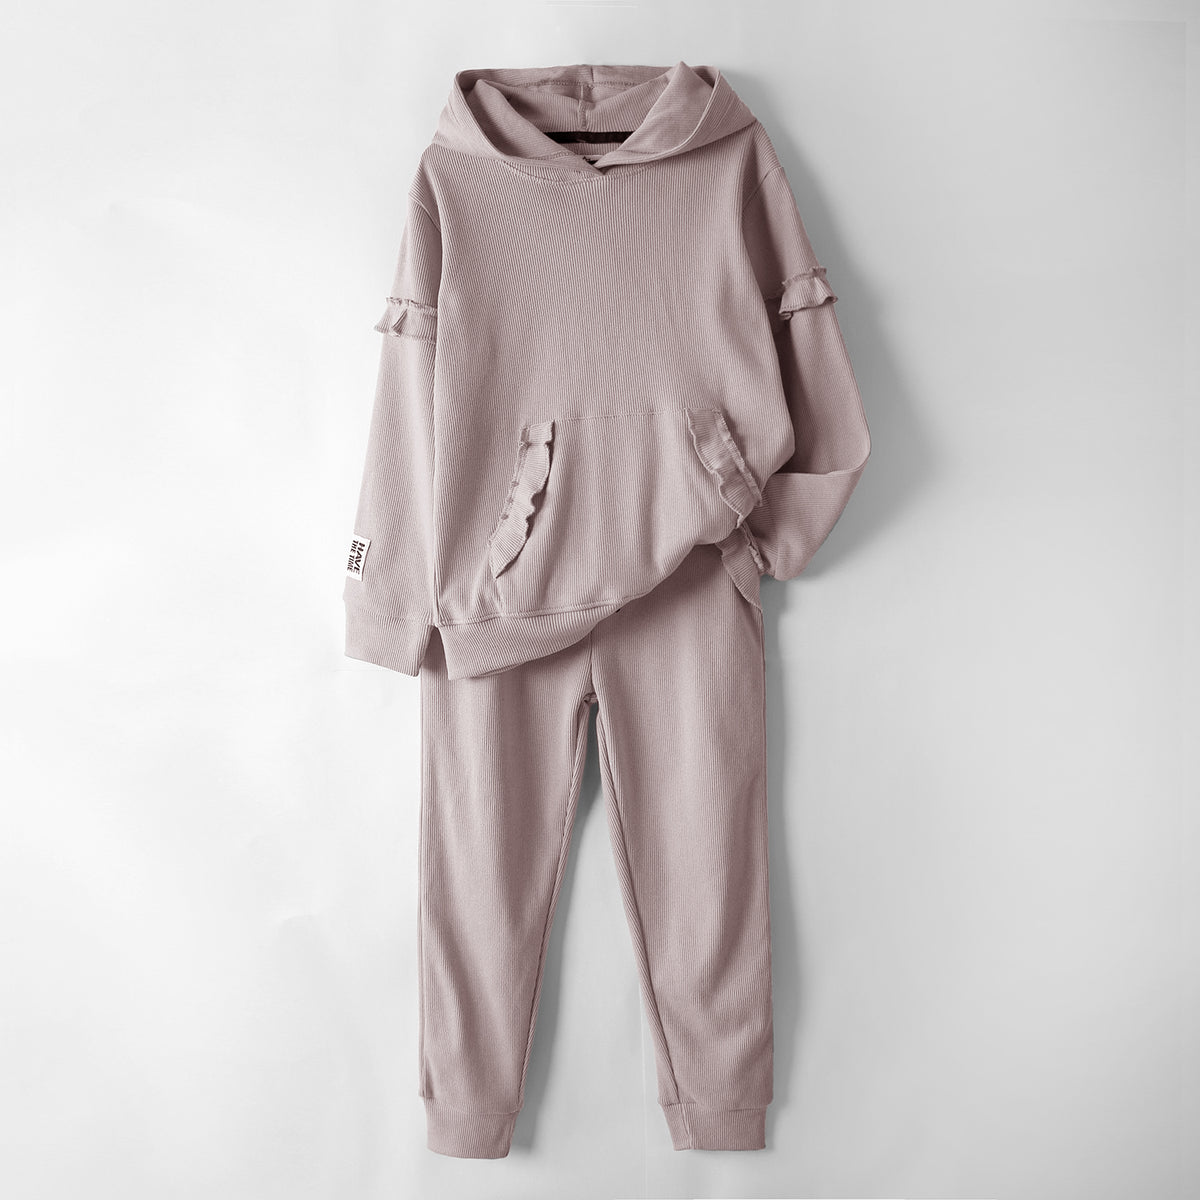 Premium Quality 2 Piece Frill Tracksuit For Girls